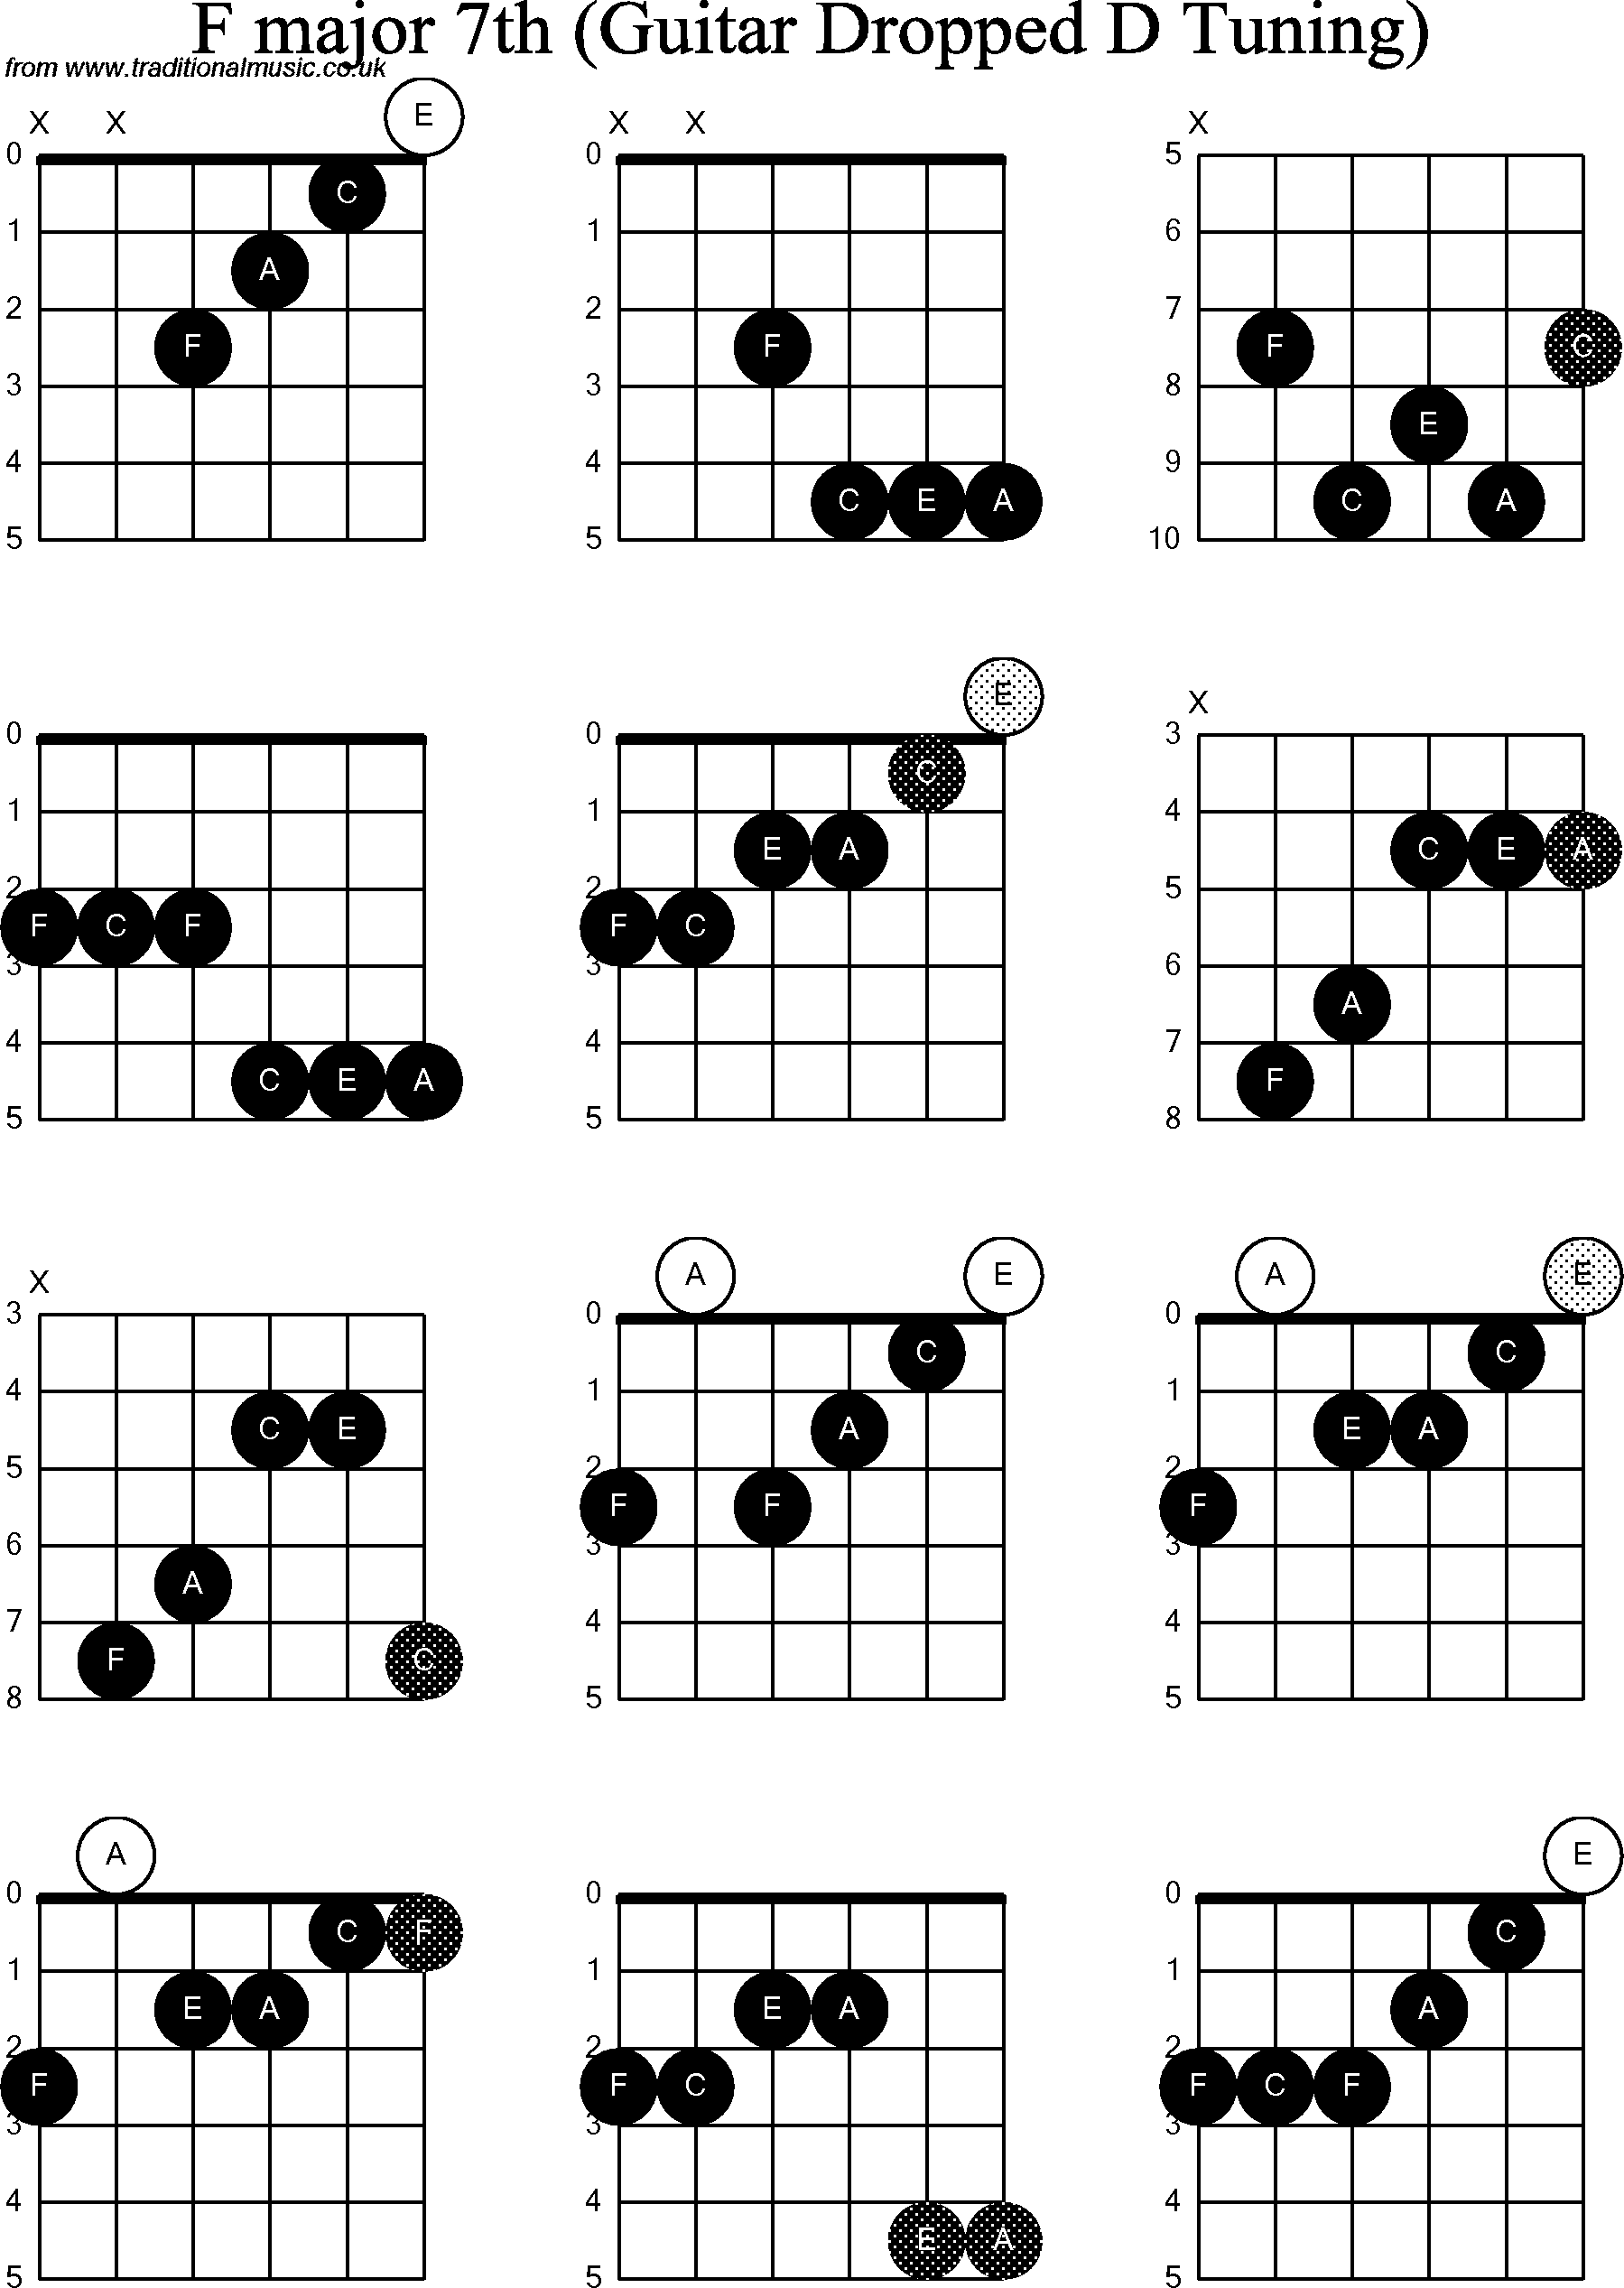 Chord diagrams for dropped D Guitar(DADGBE), F Major7th